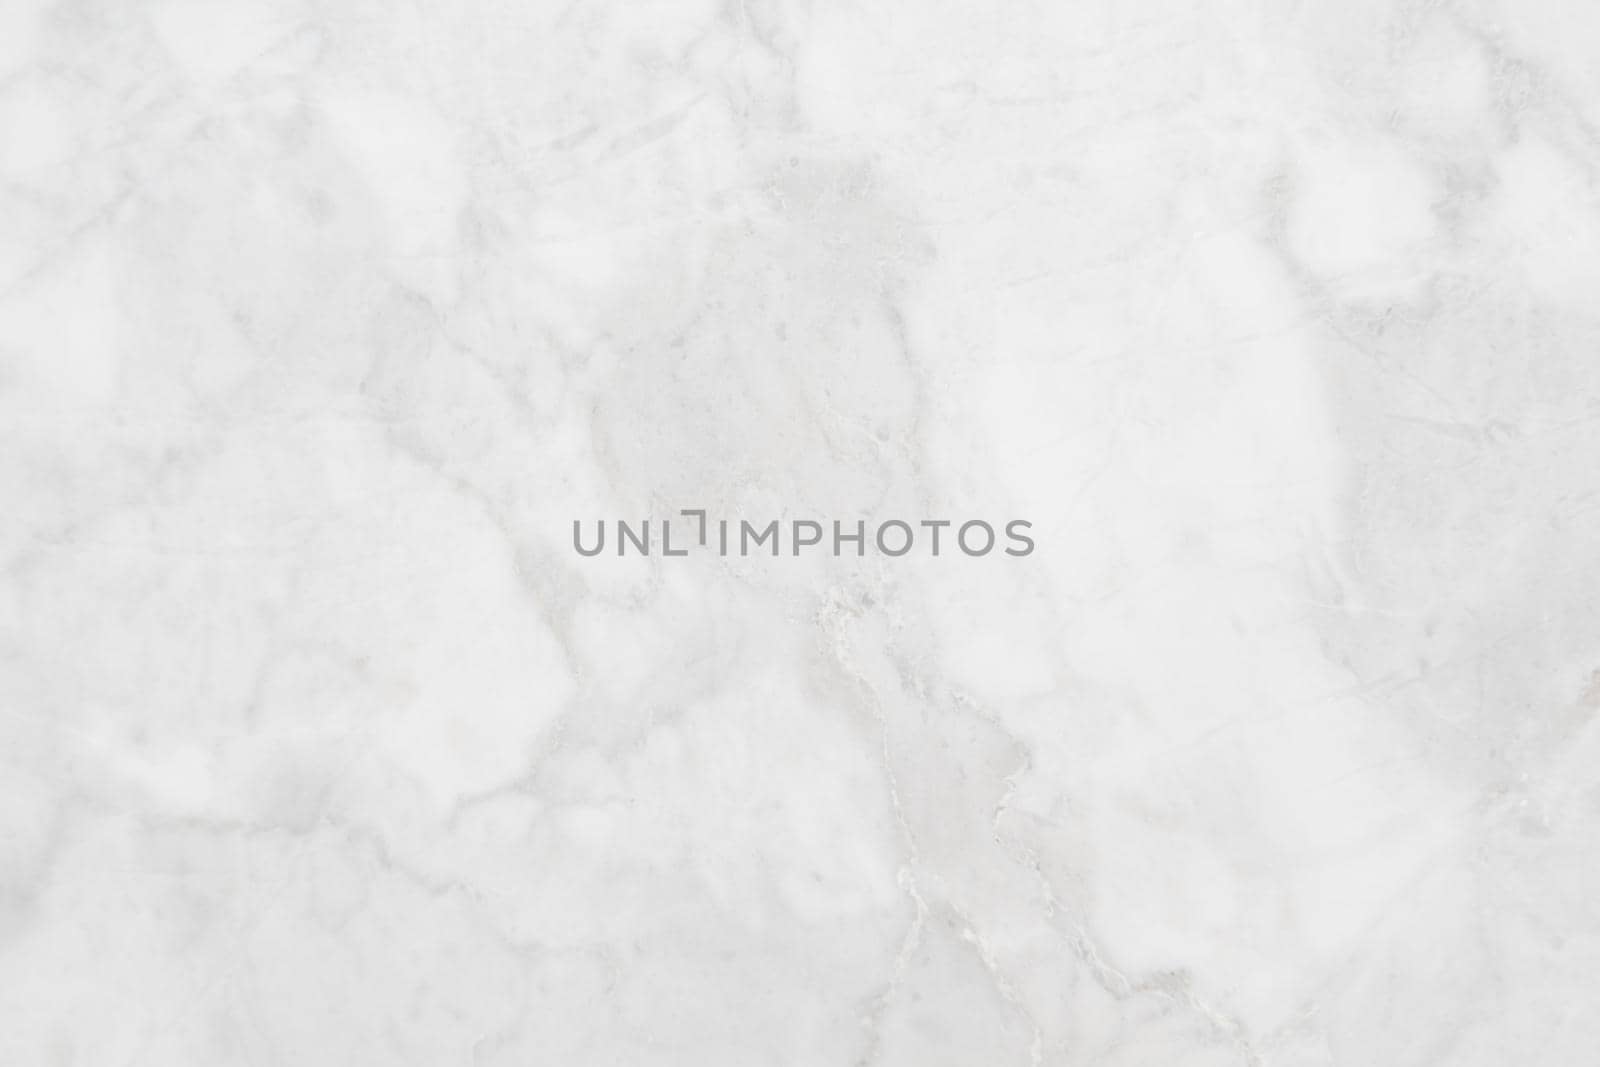 soft gray line mineral and white granite marble luxury interior texture background